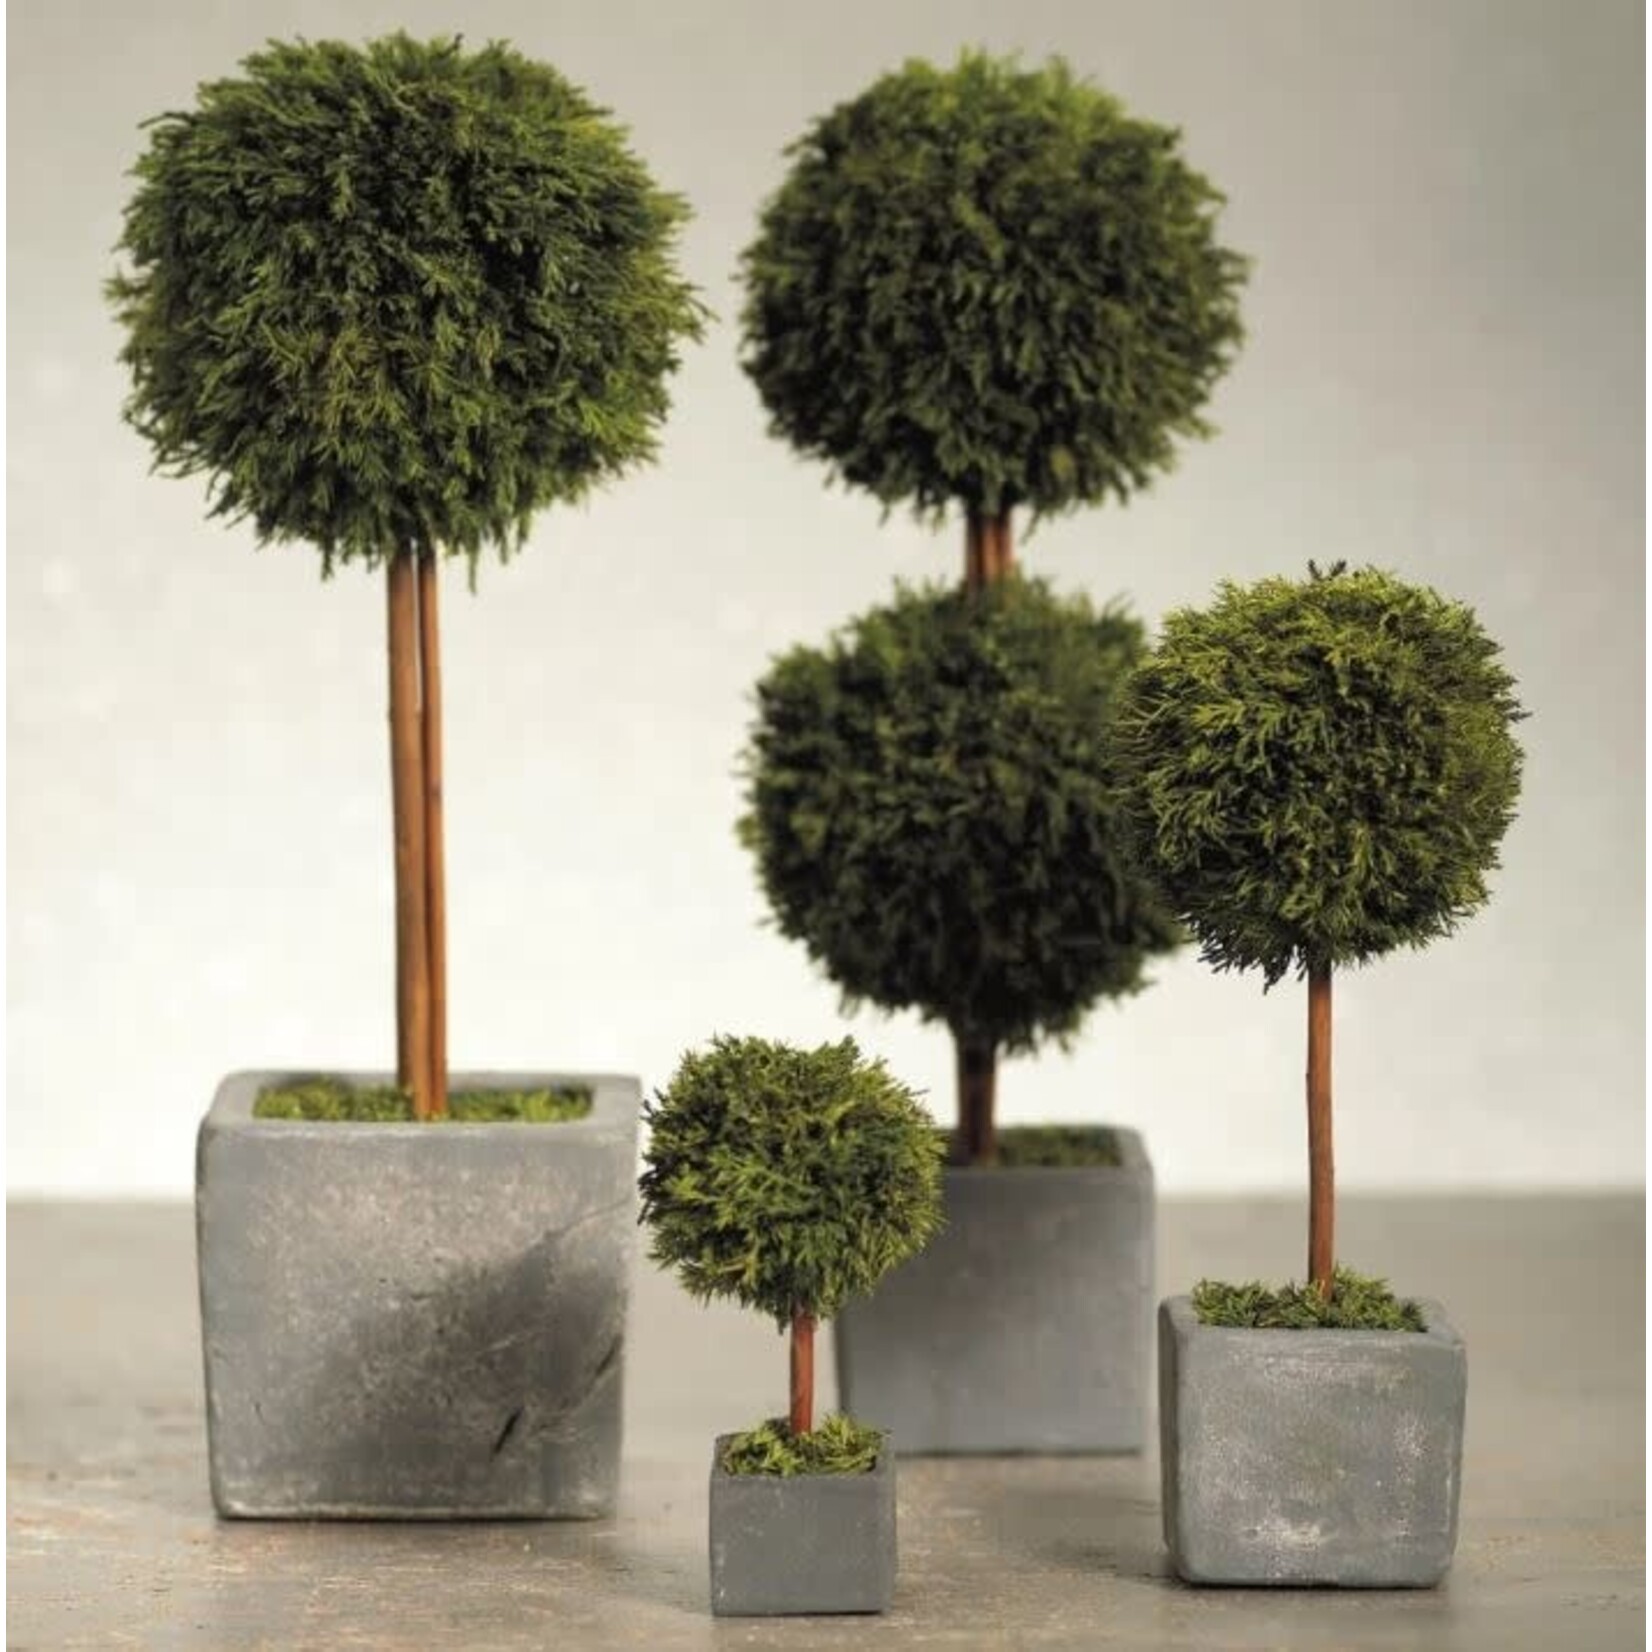 Zodax Cypress Round Double Topiary